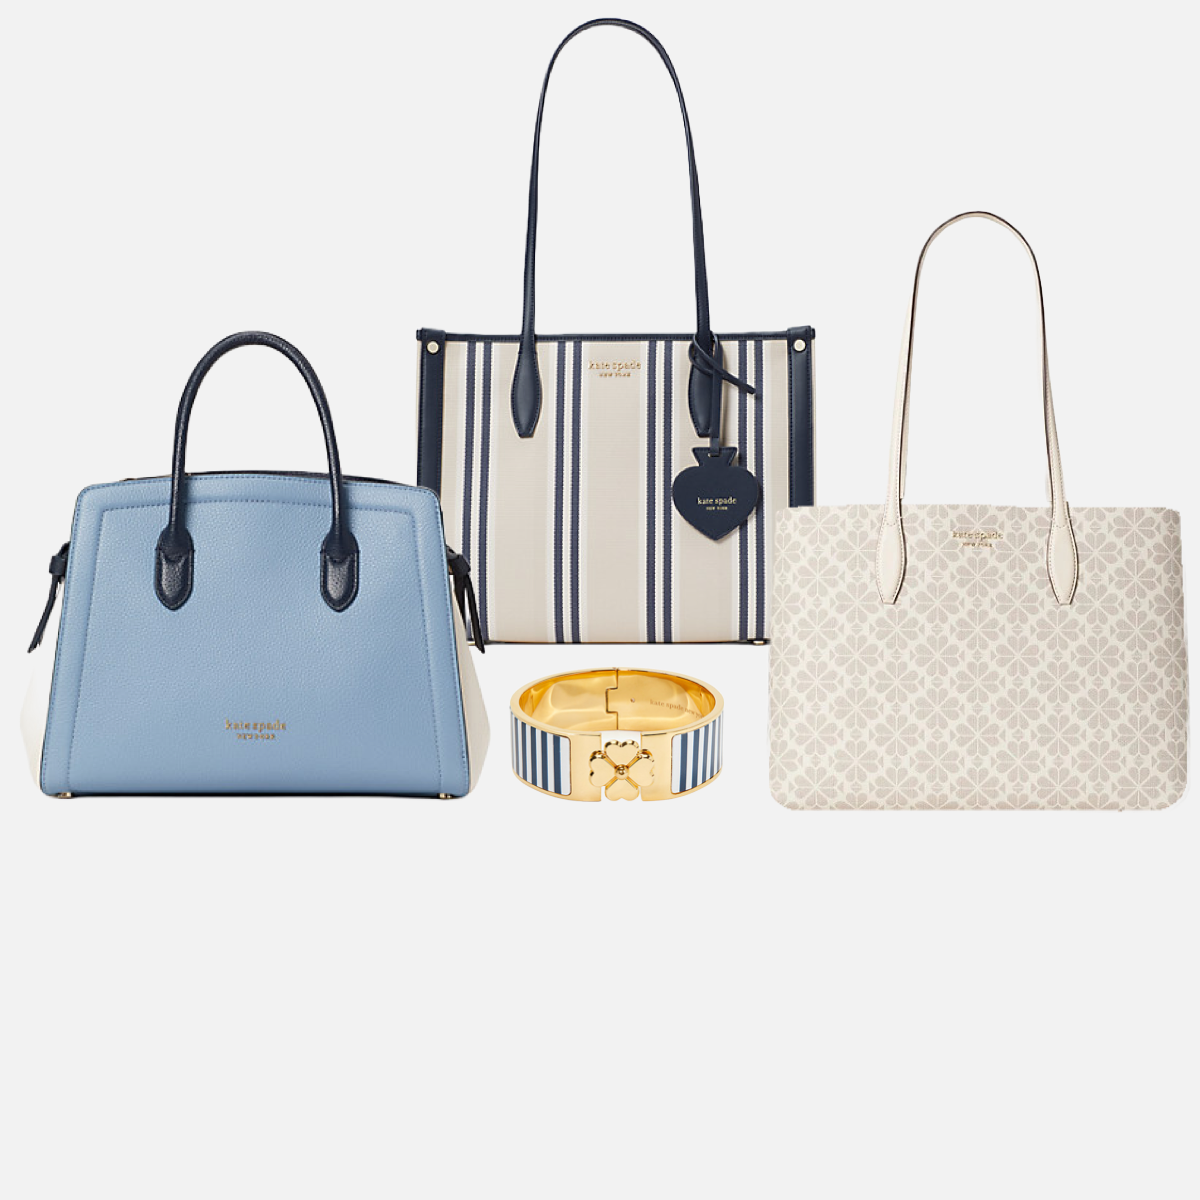 Kate Spade's End of Season Sale: All Sale Styles Are an Extra 30% Off